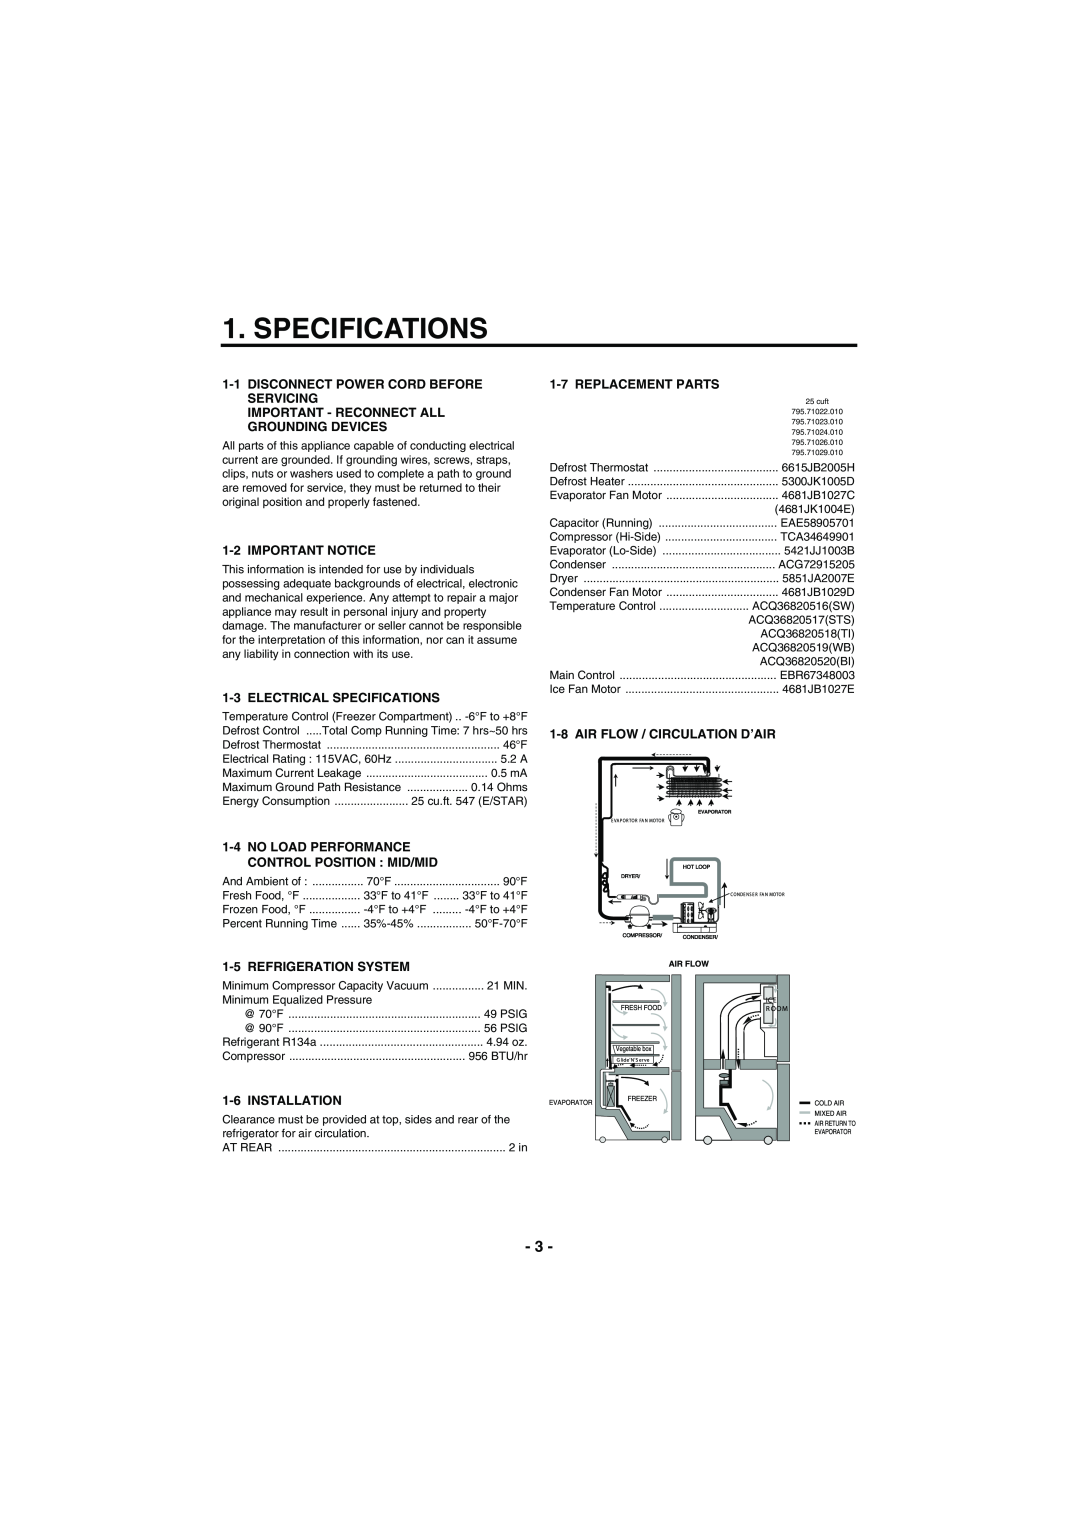 Kenmore 795-71022.010 Specifications, Disconnect Power Cord Before Servicing, Important - Reconnect All Grounding Devices 